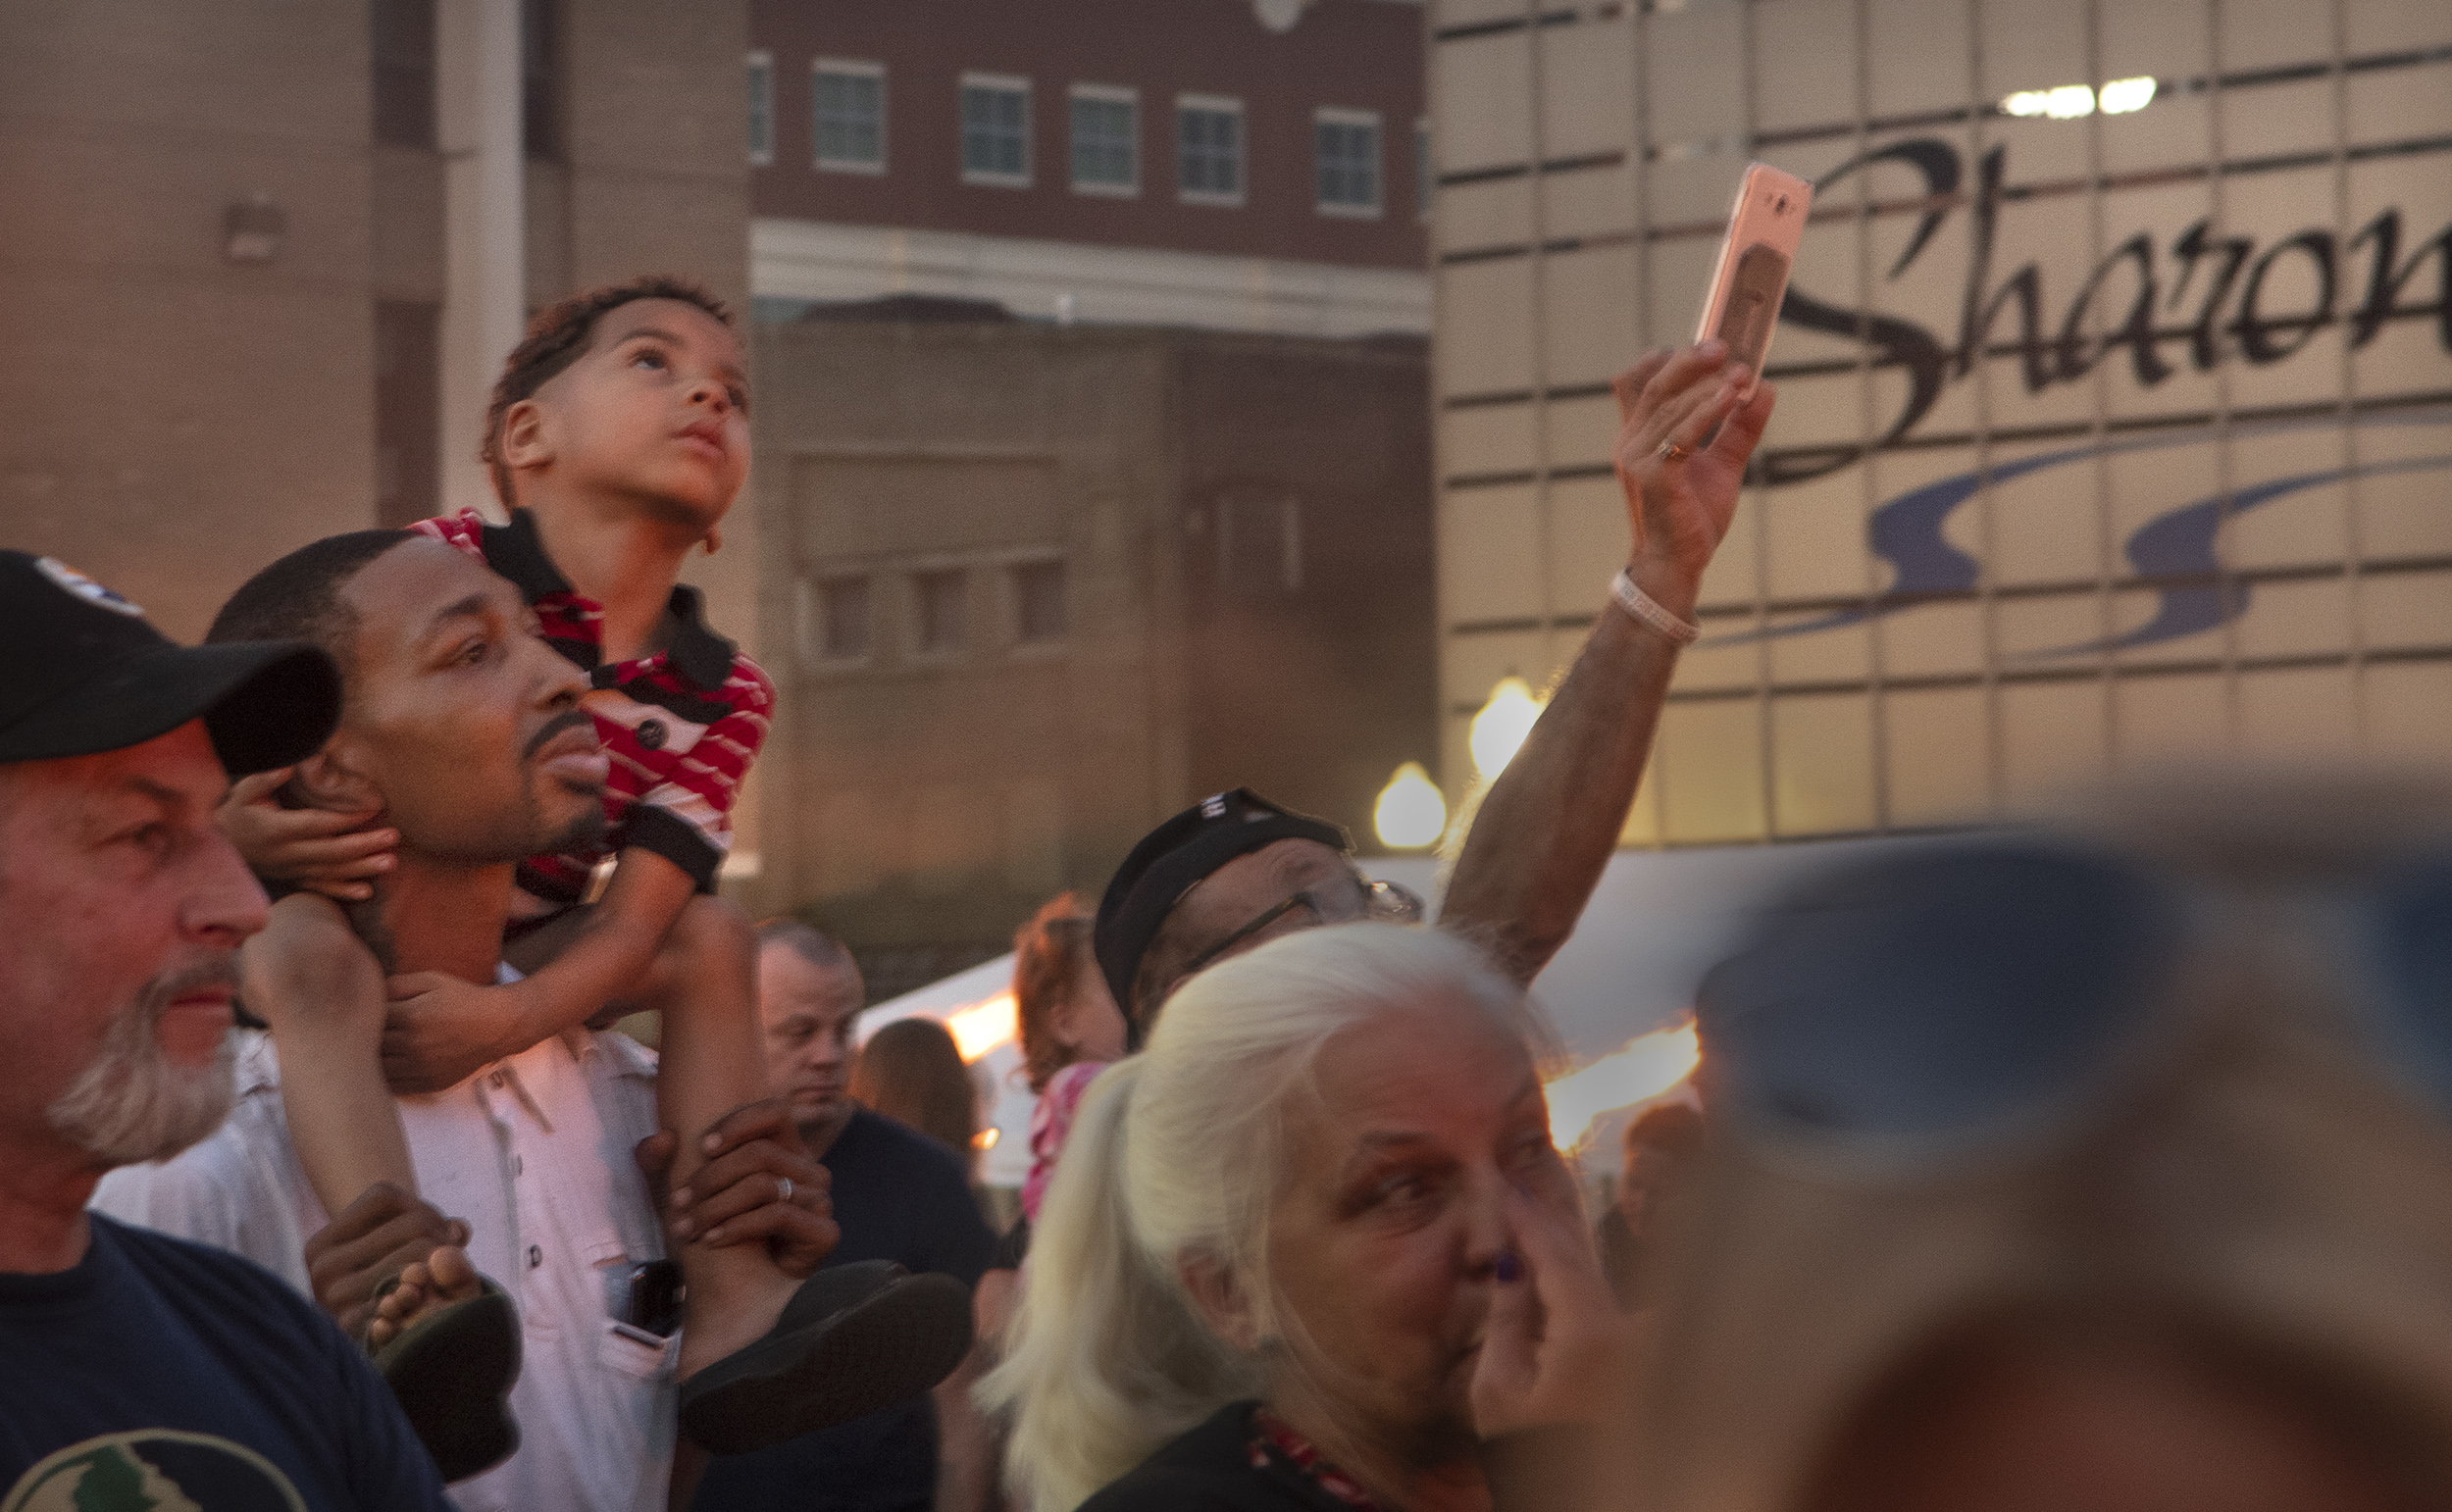 While thousands of audience members were captivated by the fires at the event in Sharon, PA, one young boy was taken with a drone that flew overhead. Photo by Morayo Ogunbayo